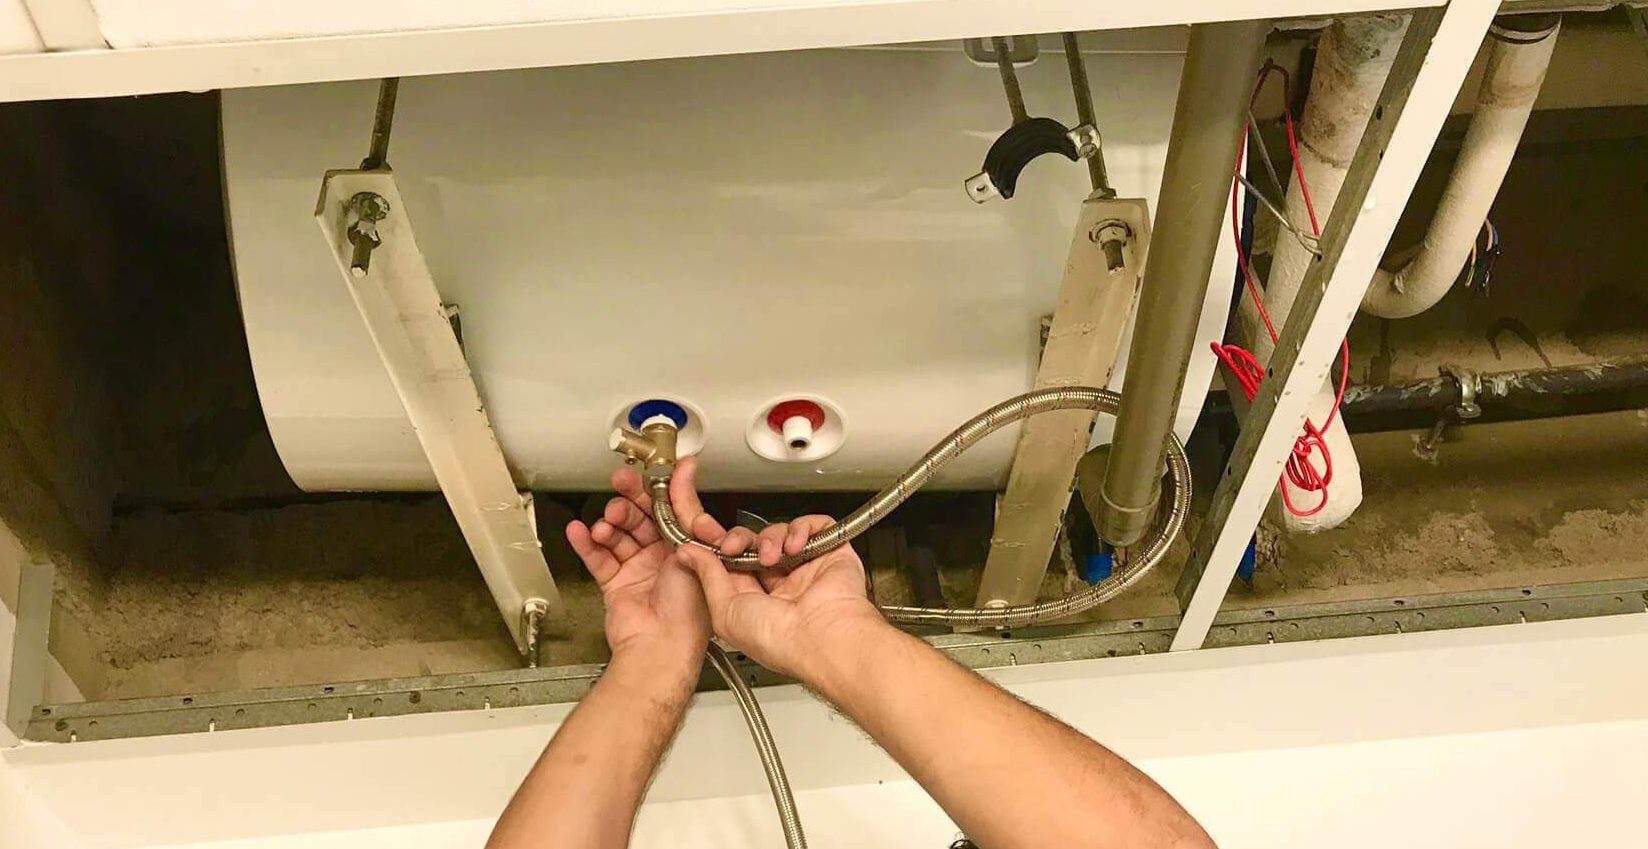 water heater replacement